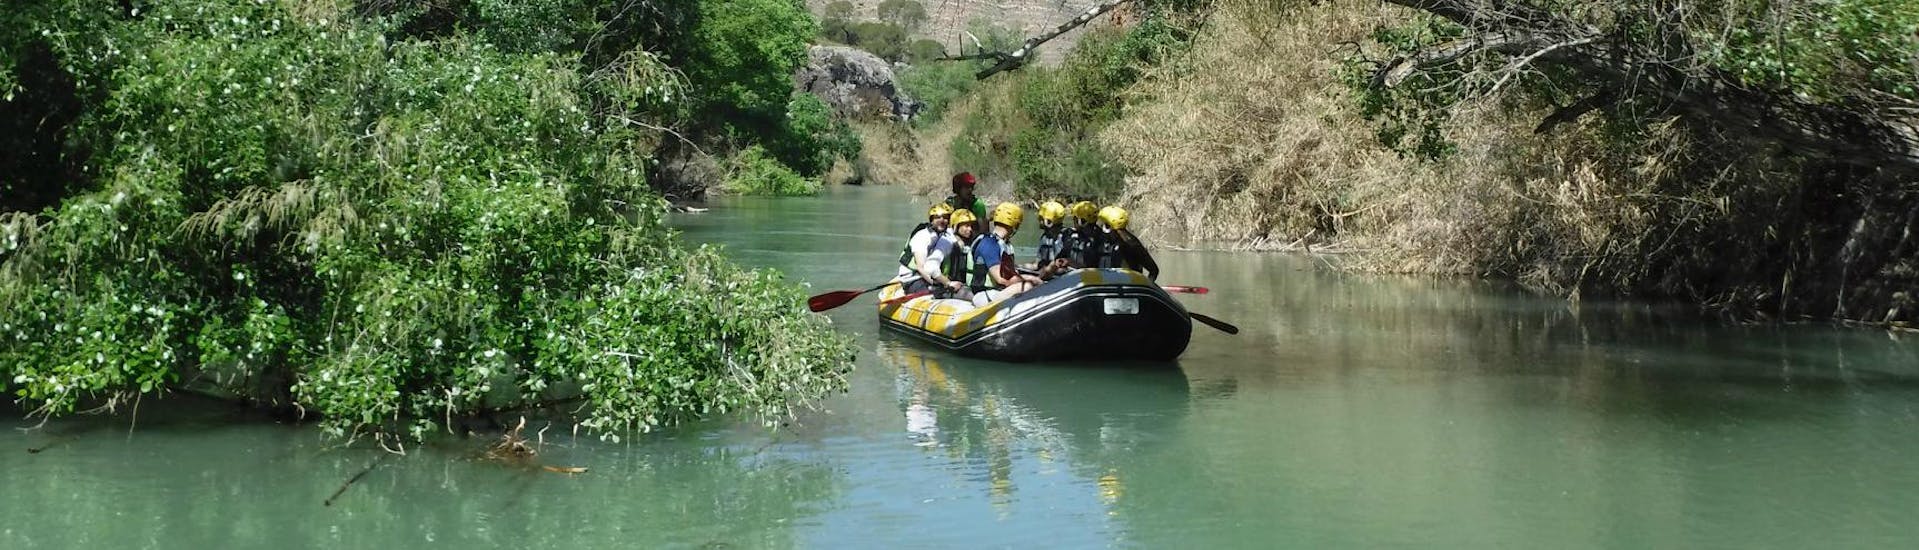 A group of tour participants paddles through the beautiful waters of the Rio Segura during the rafting to Cañón de Almadenes together with Cañón y Cañón Multiaventura.